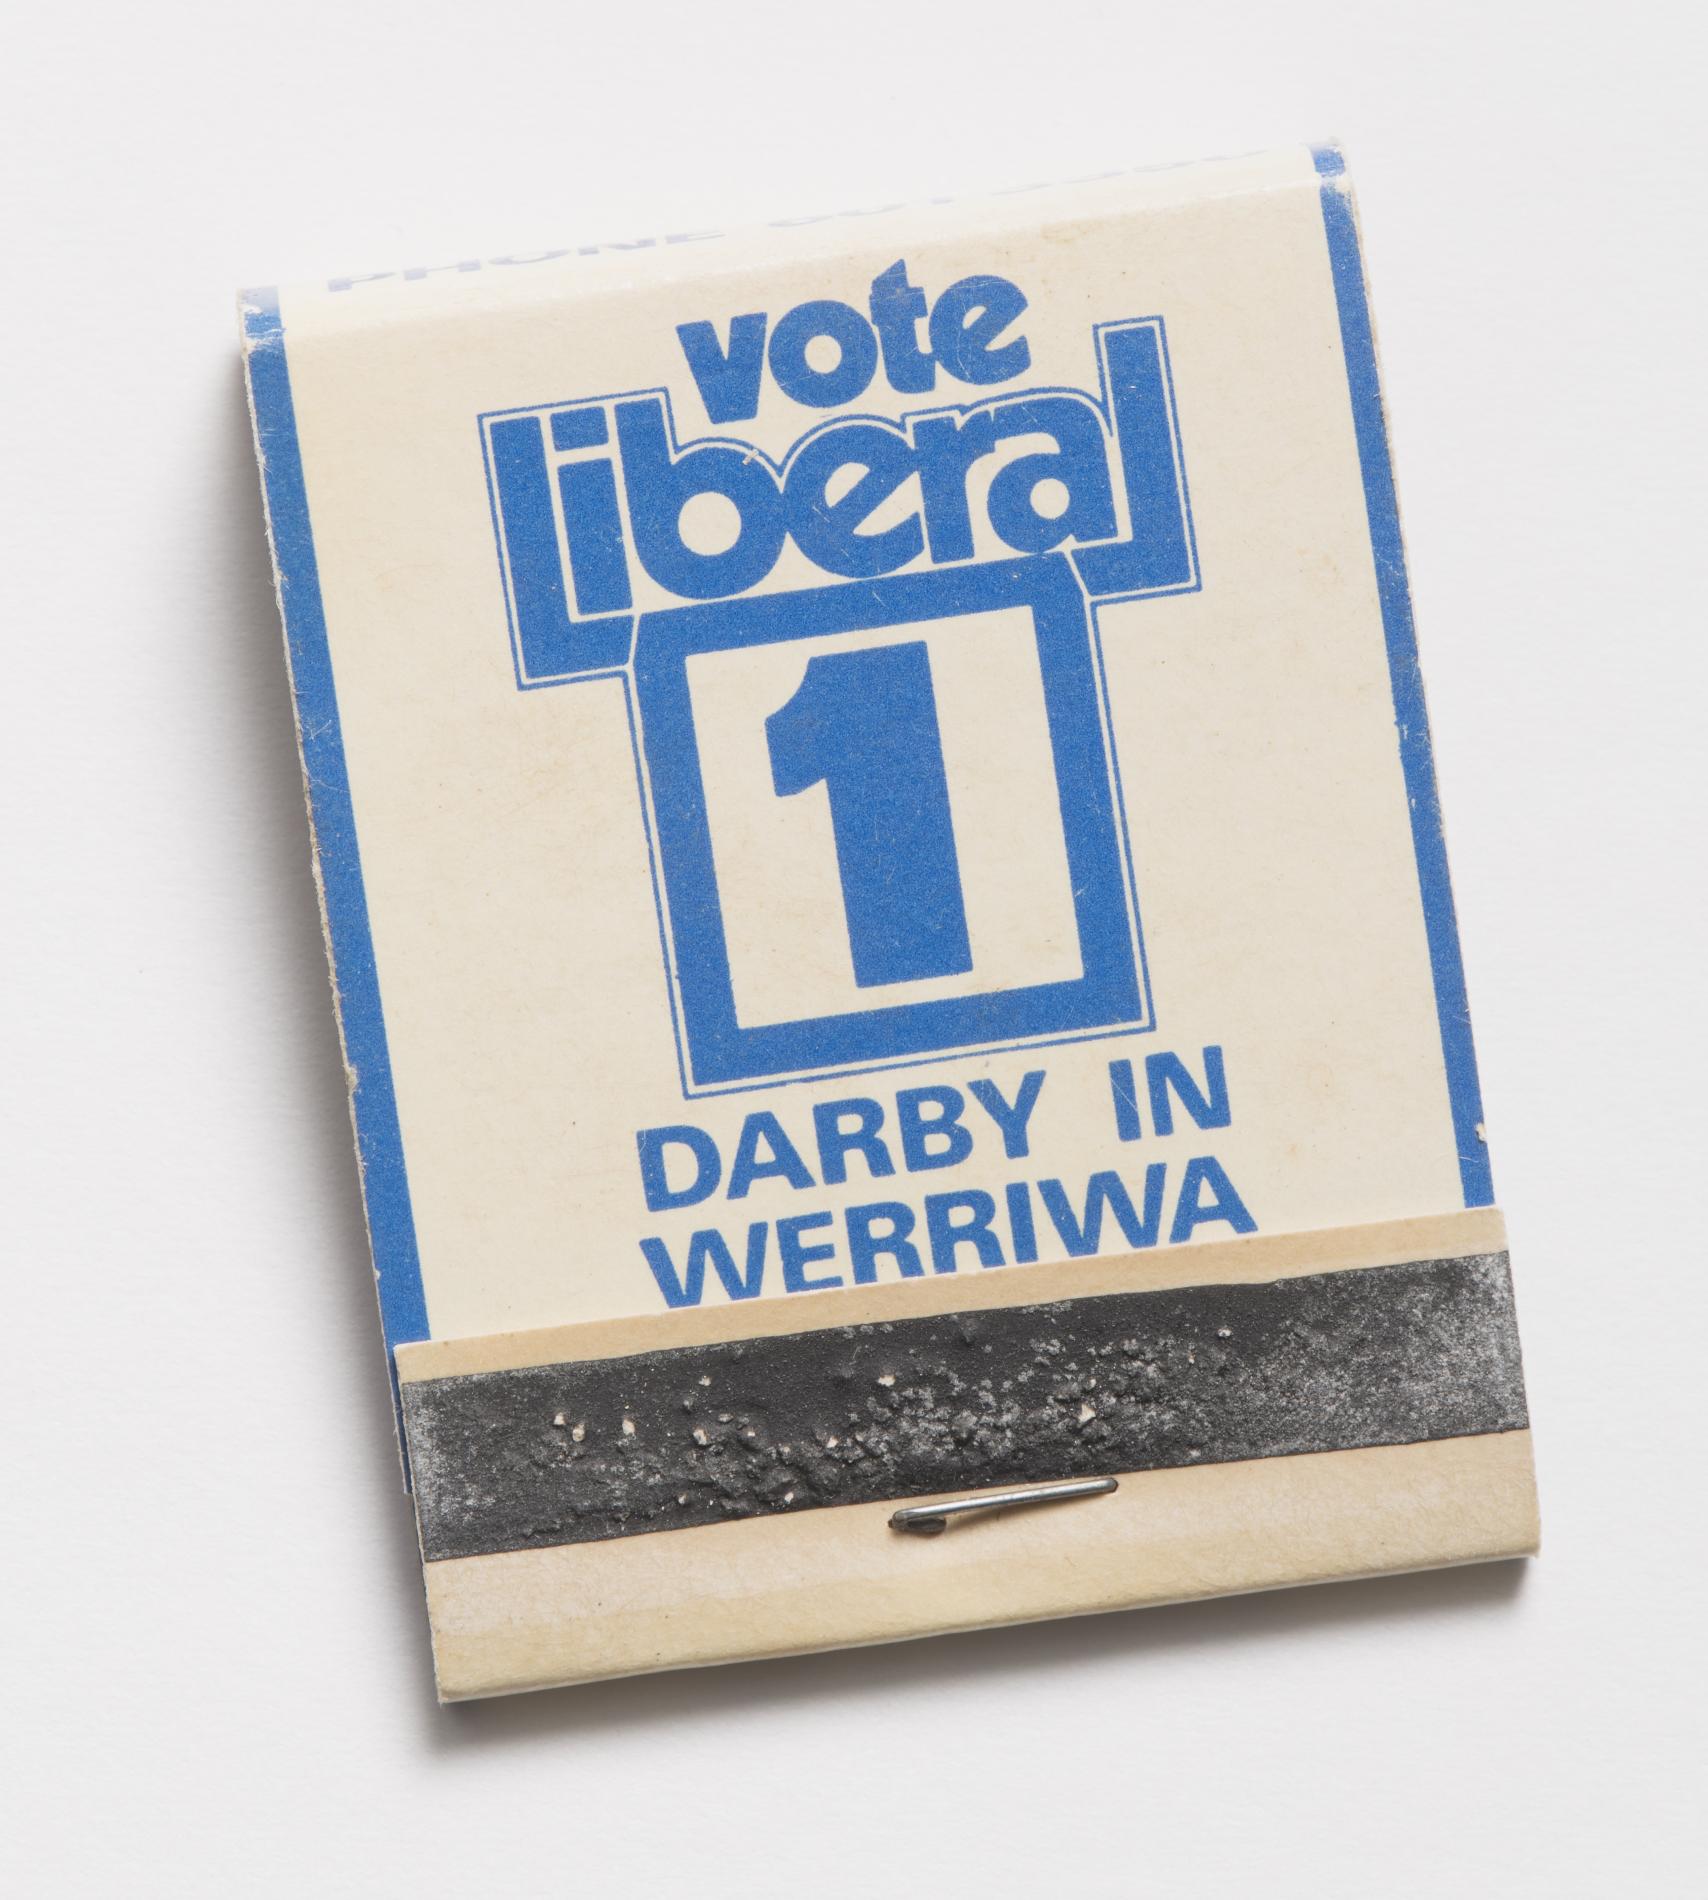 Photograph of a small matchbook reading "Vote liberal 1 Darby in Werriwa"